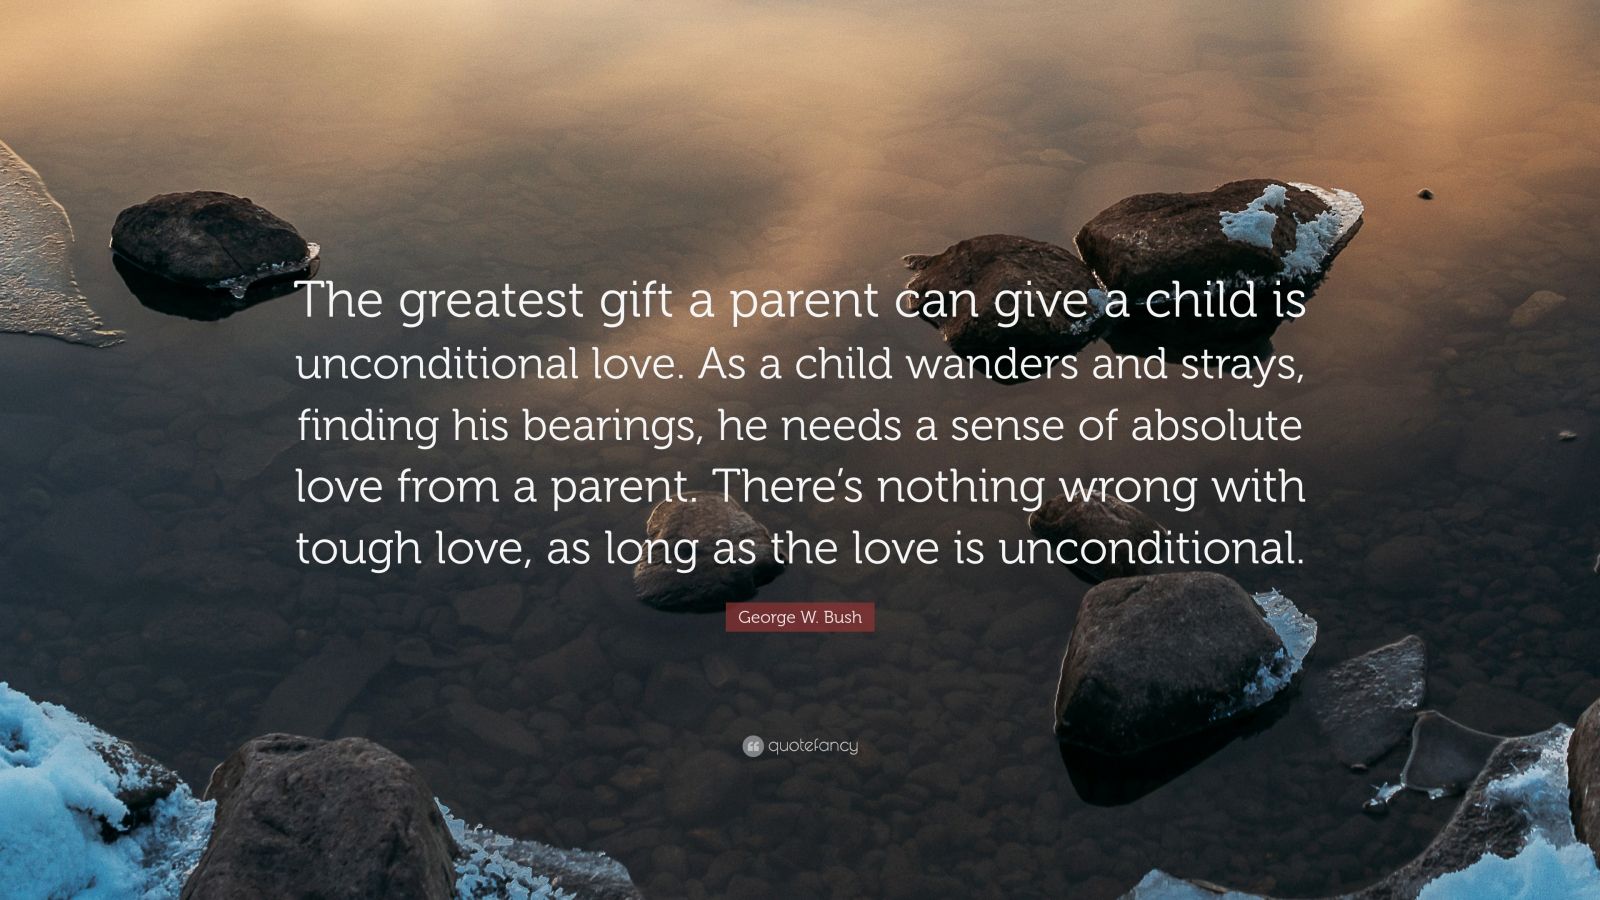 CLN - A mother's love is the greatest gift in the world, show your